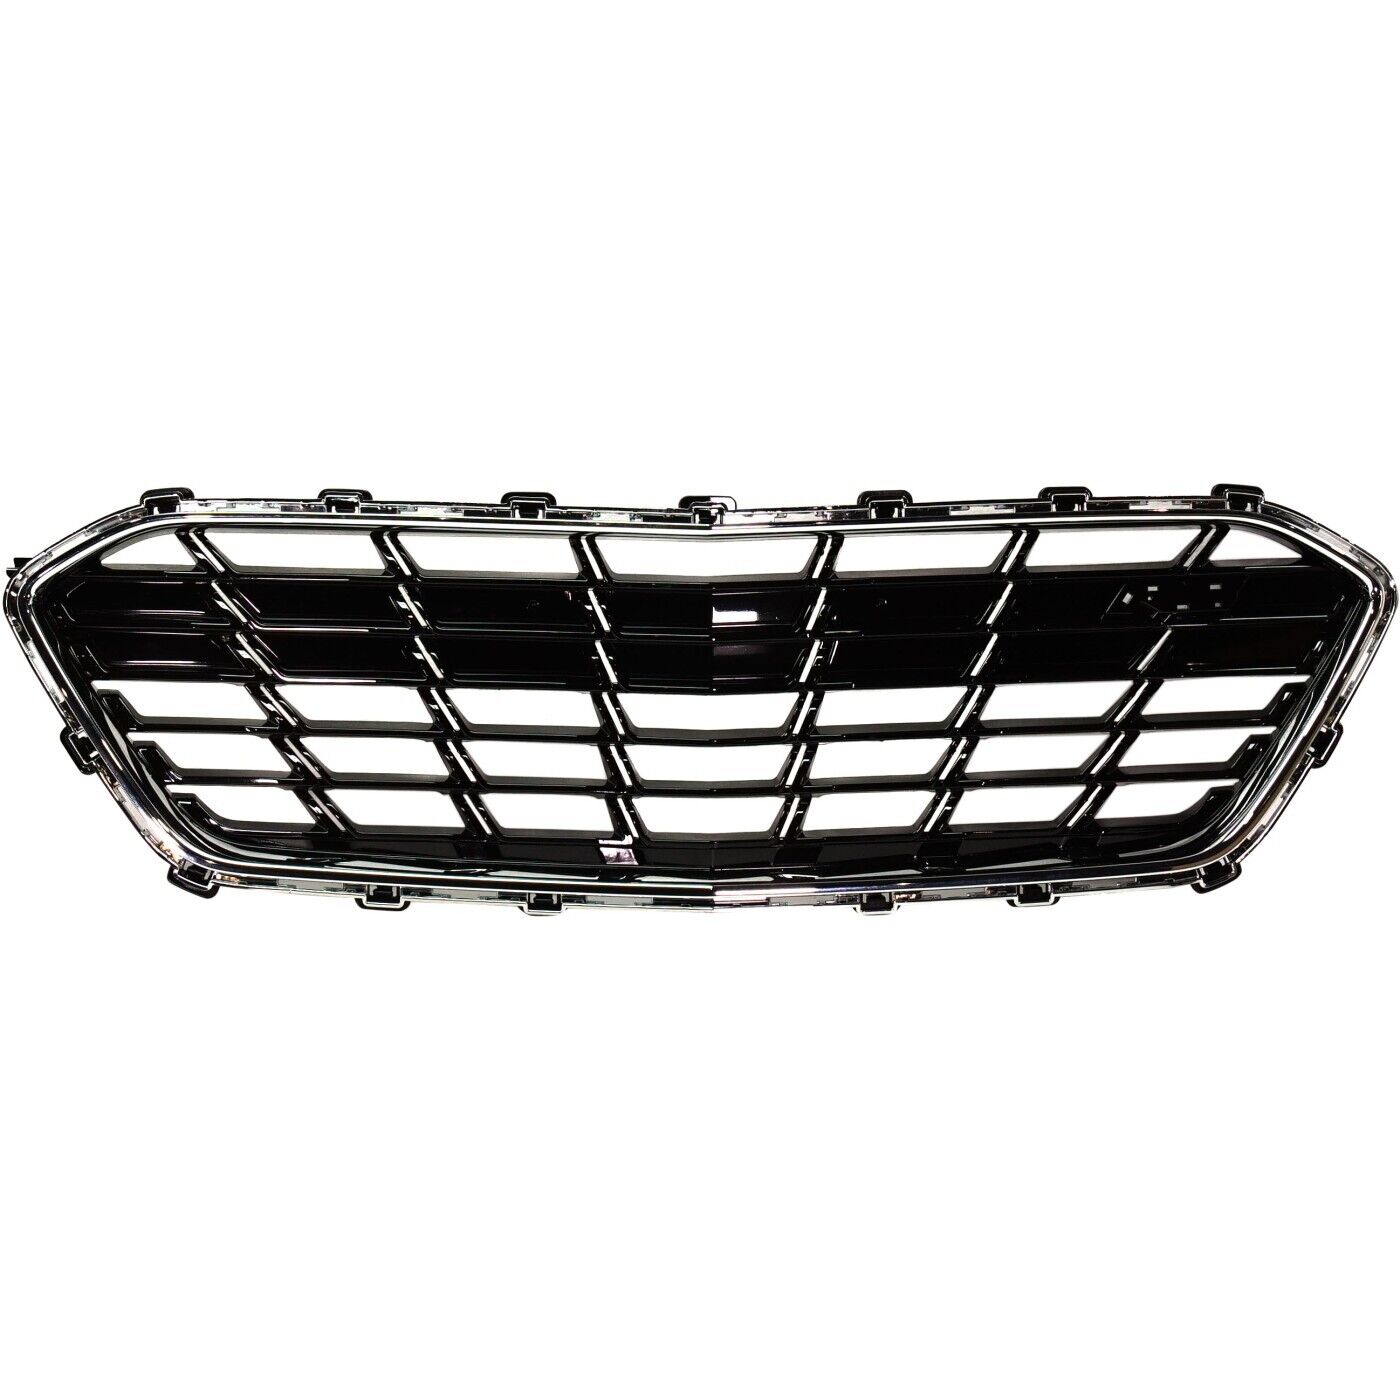 Bumper Face Bar Grilles Front for Chevy  84009674 Chevrolet Cruze 2016-2018